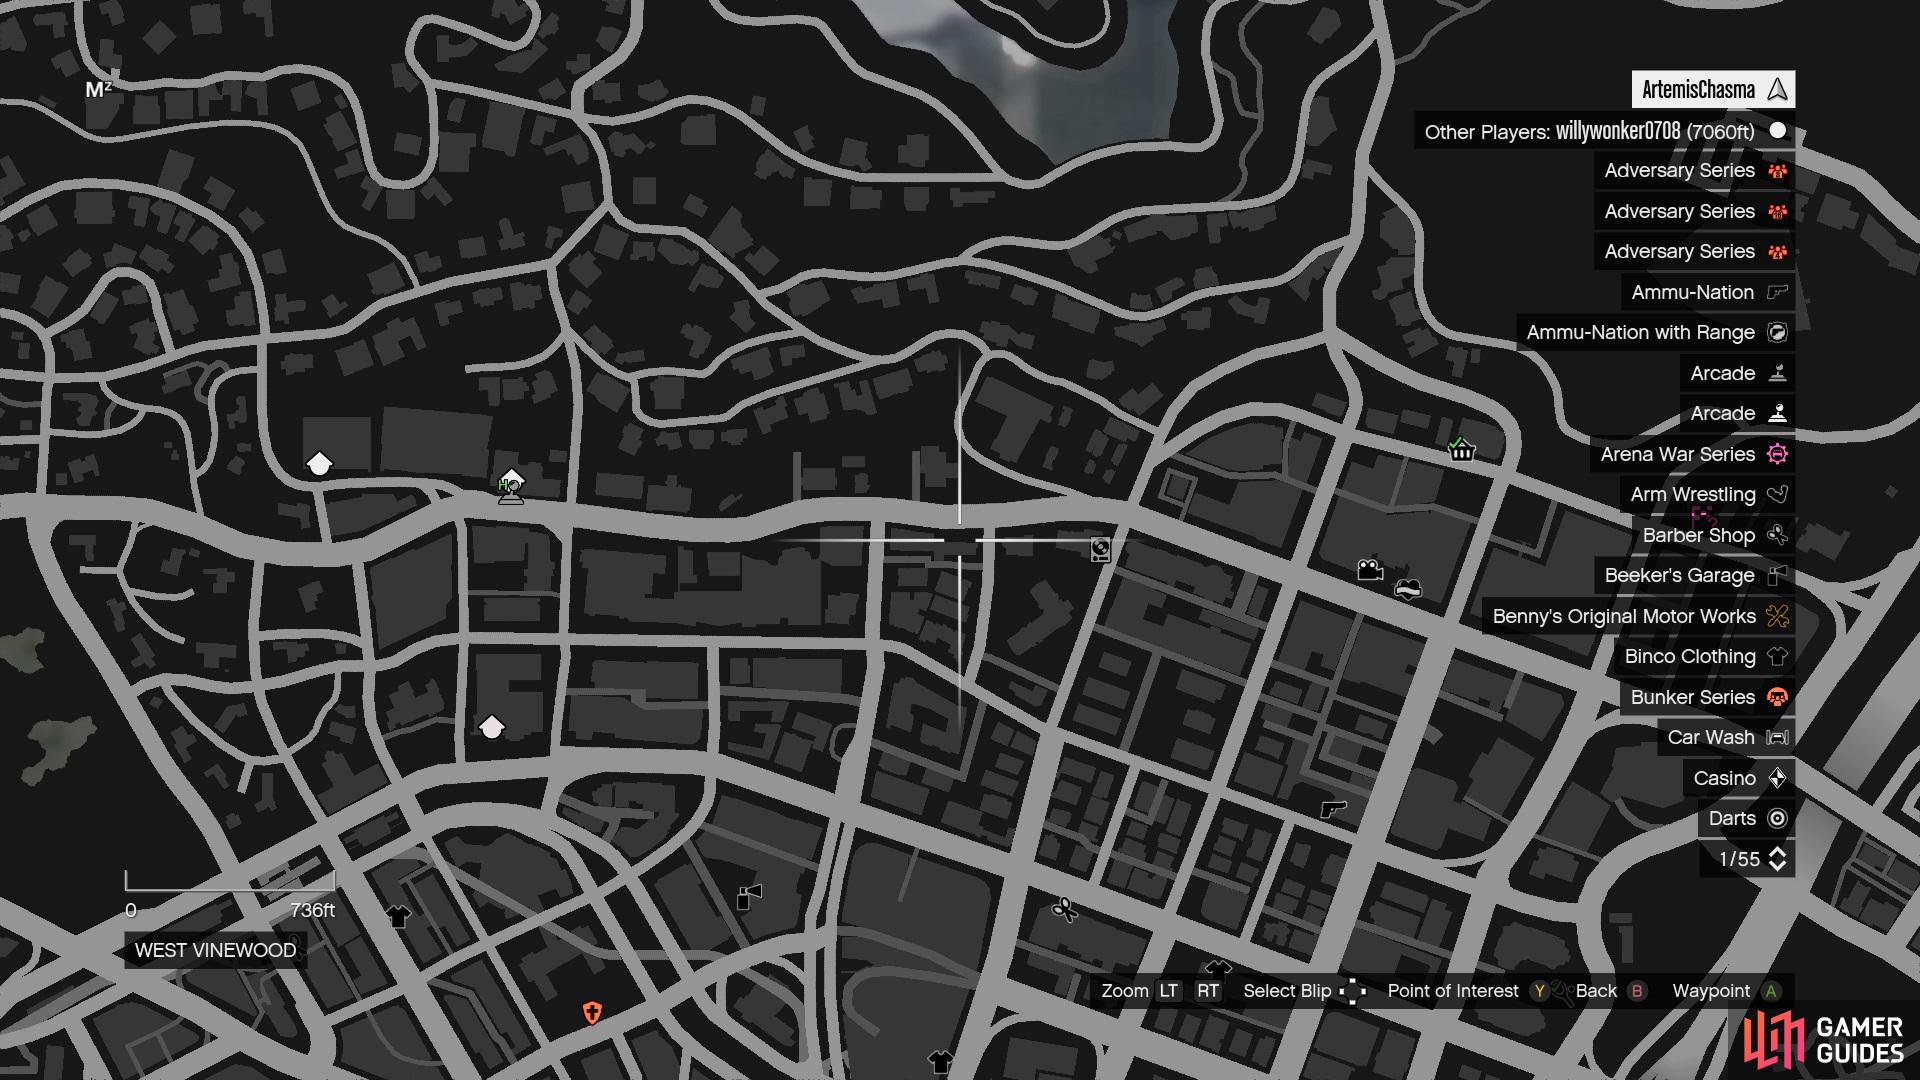 Head to the location on the map 